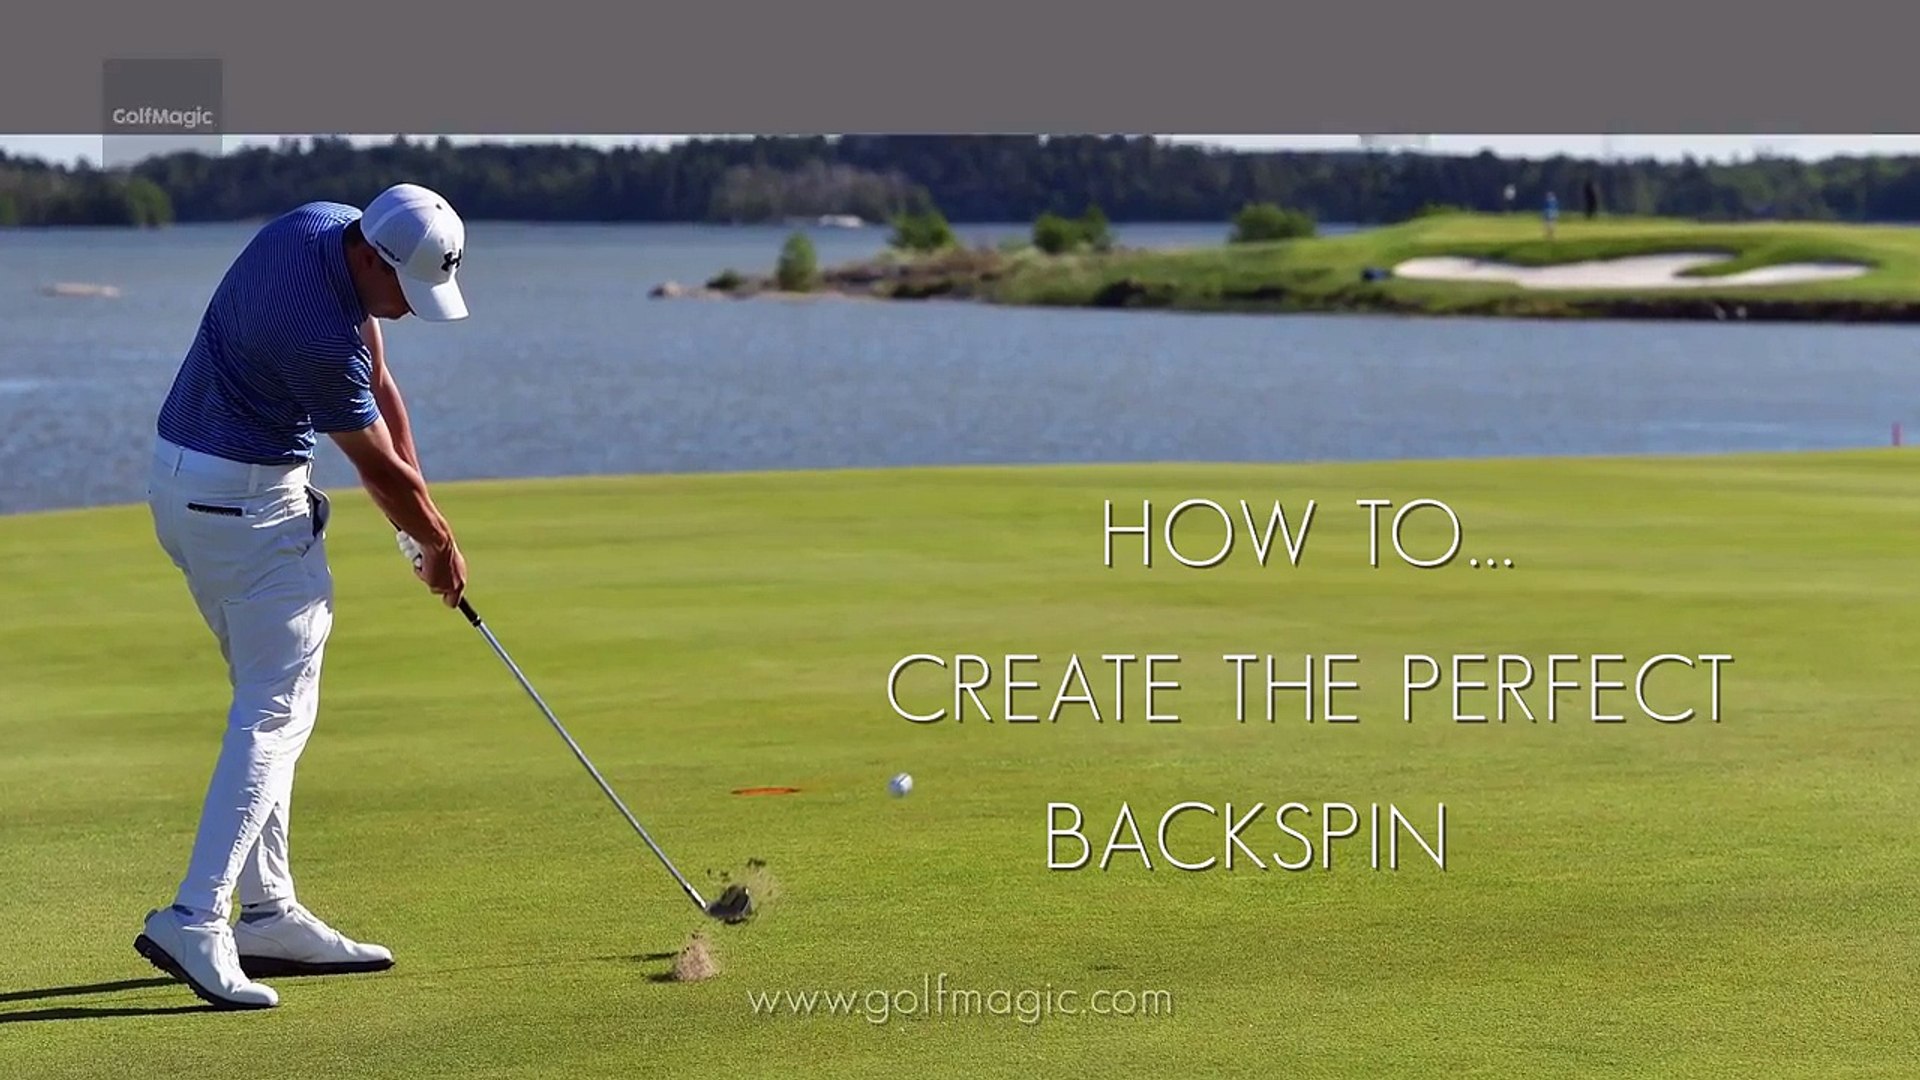 Golf Magic - How to create backspin - video Dailymotion